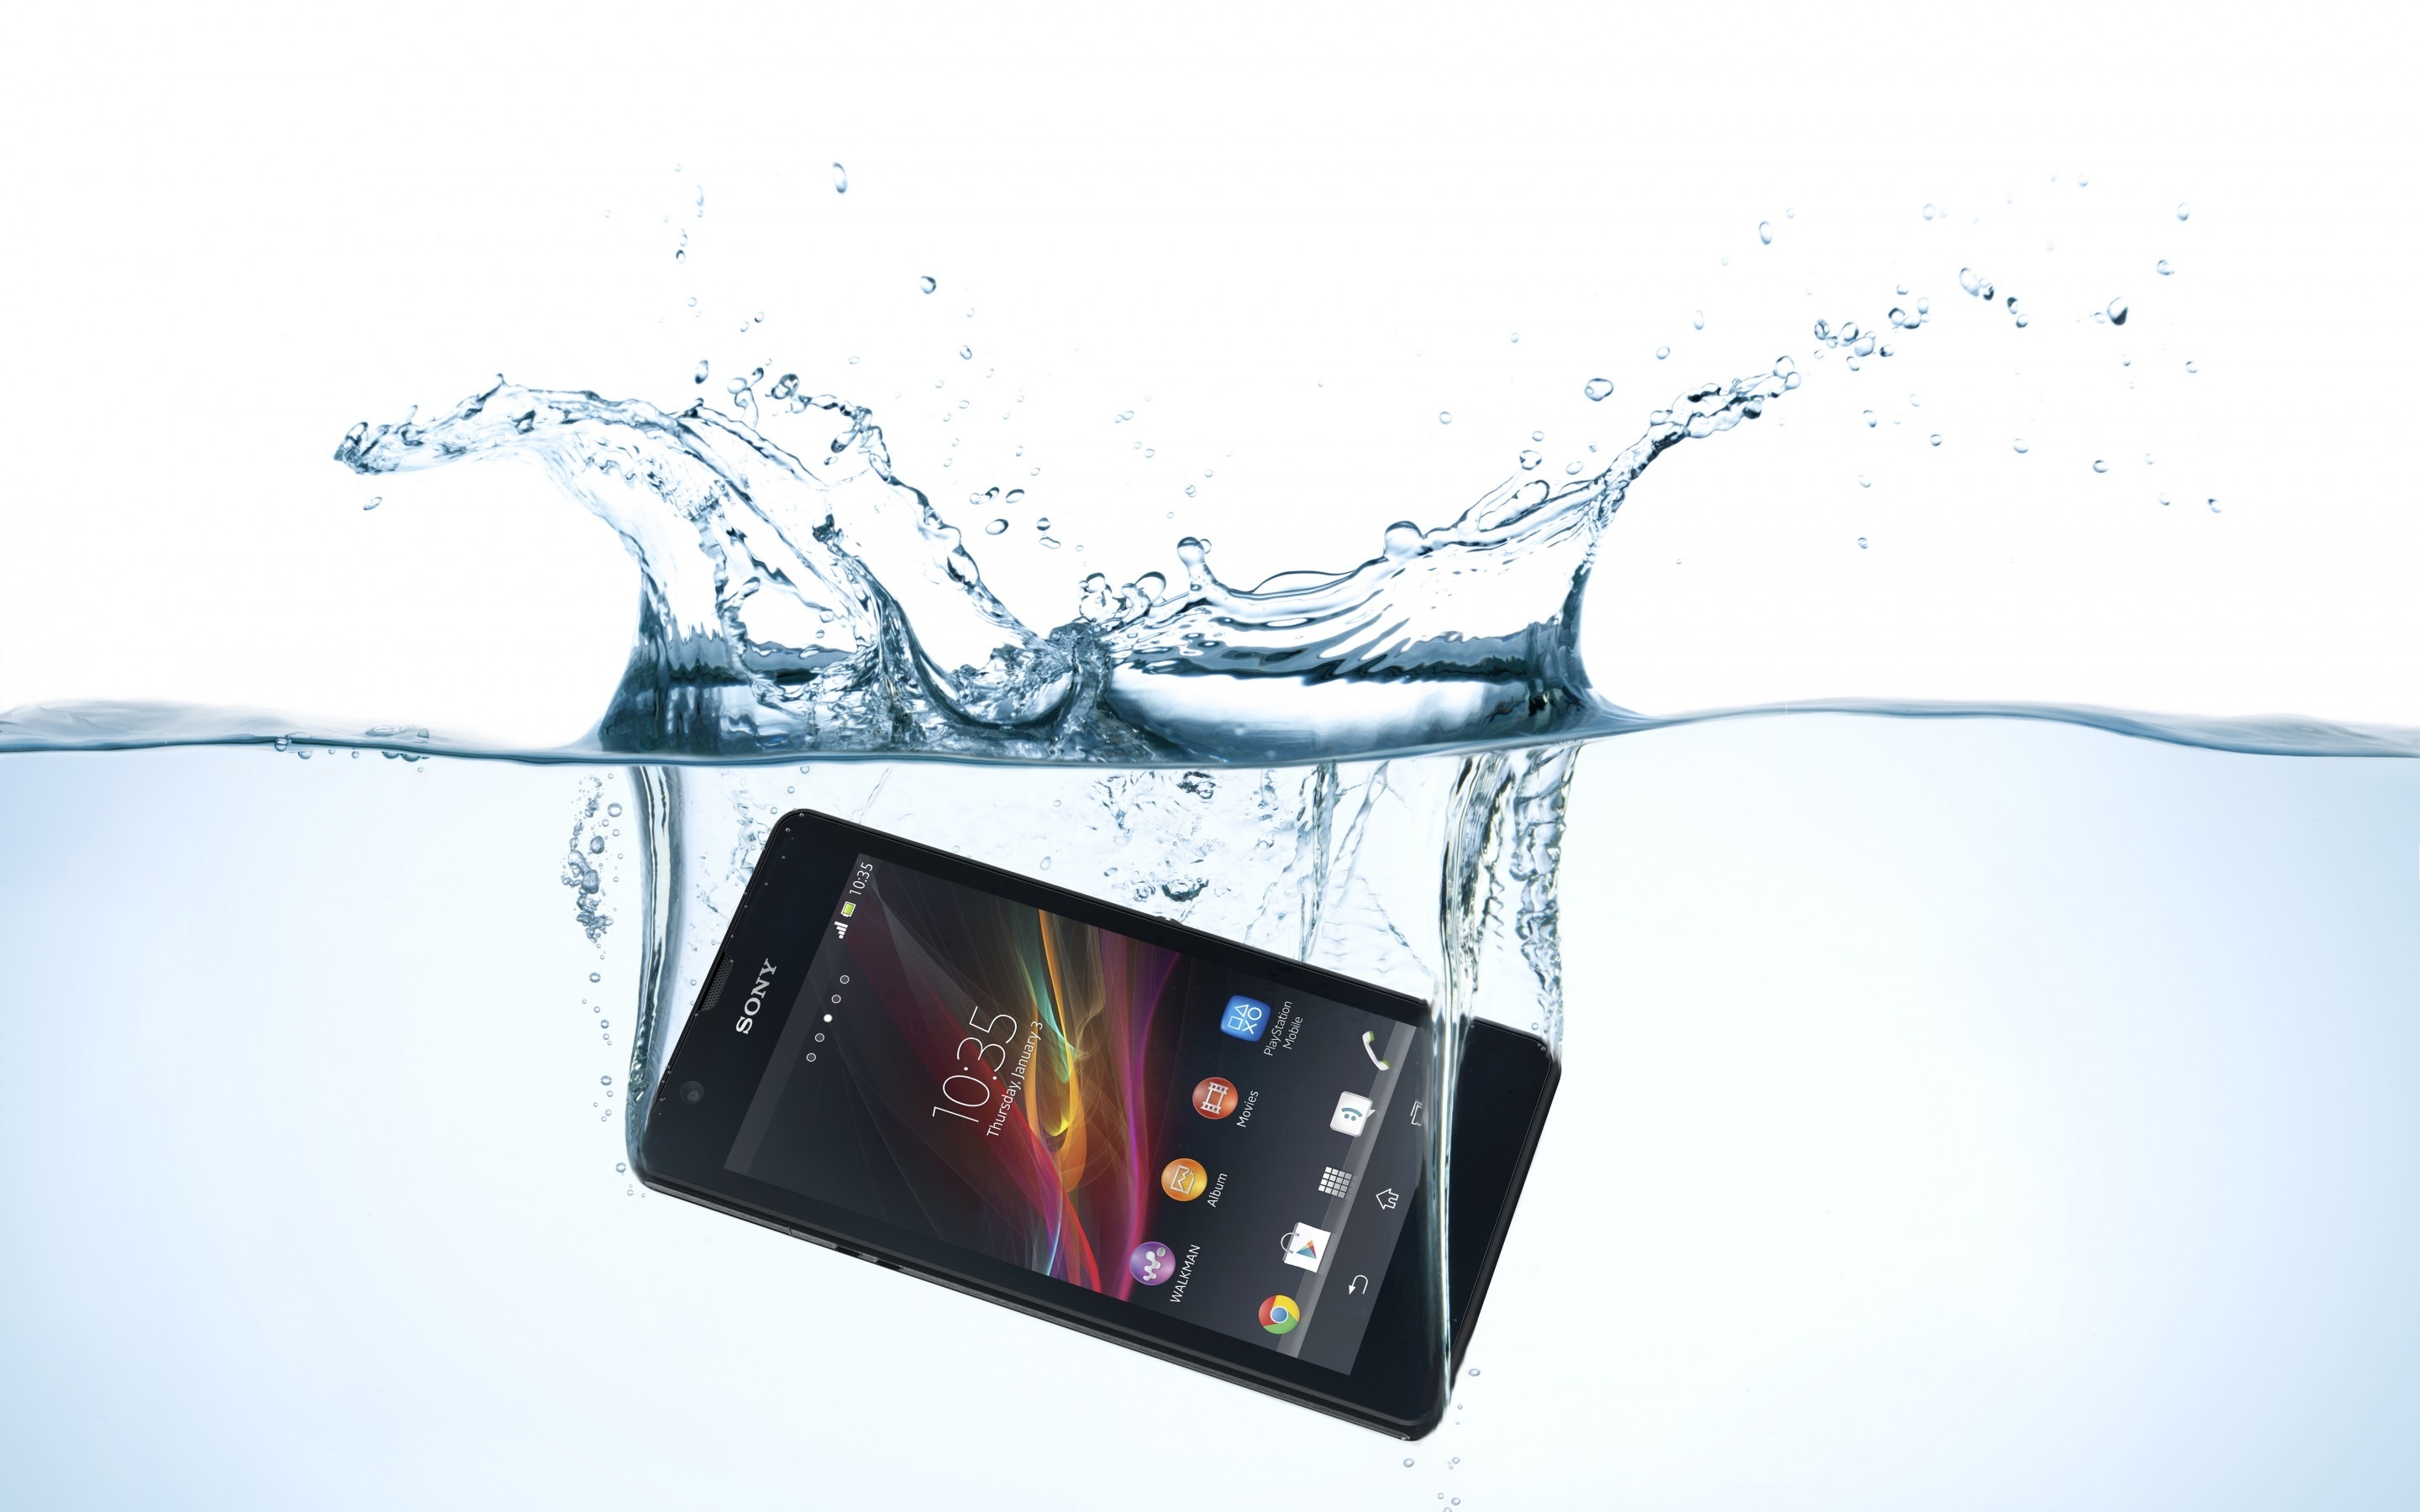 Sony Xperia Swimming for 2880 x 1800 Retina Display resolution